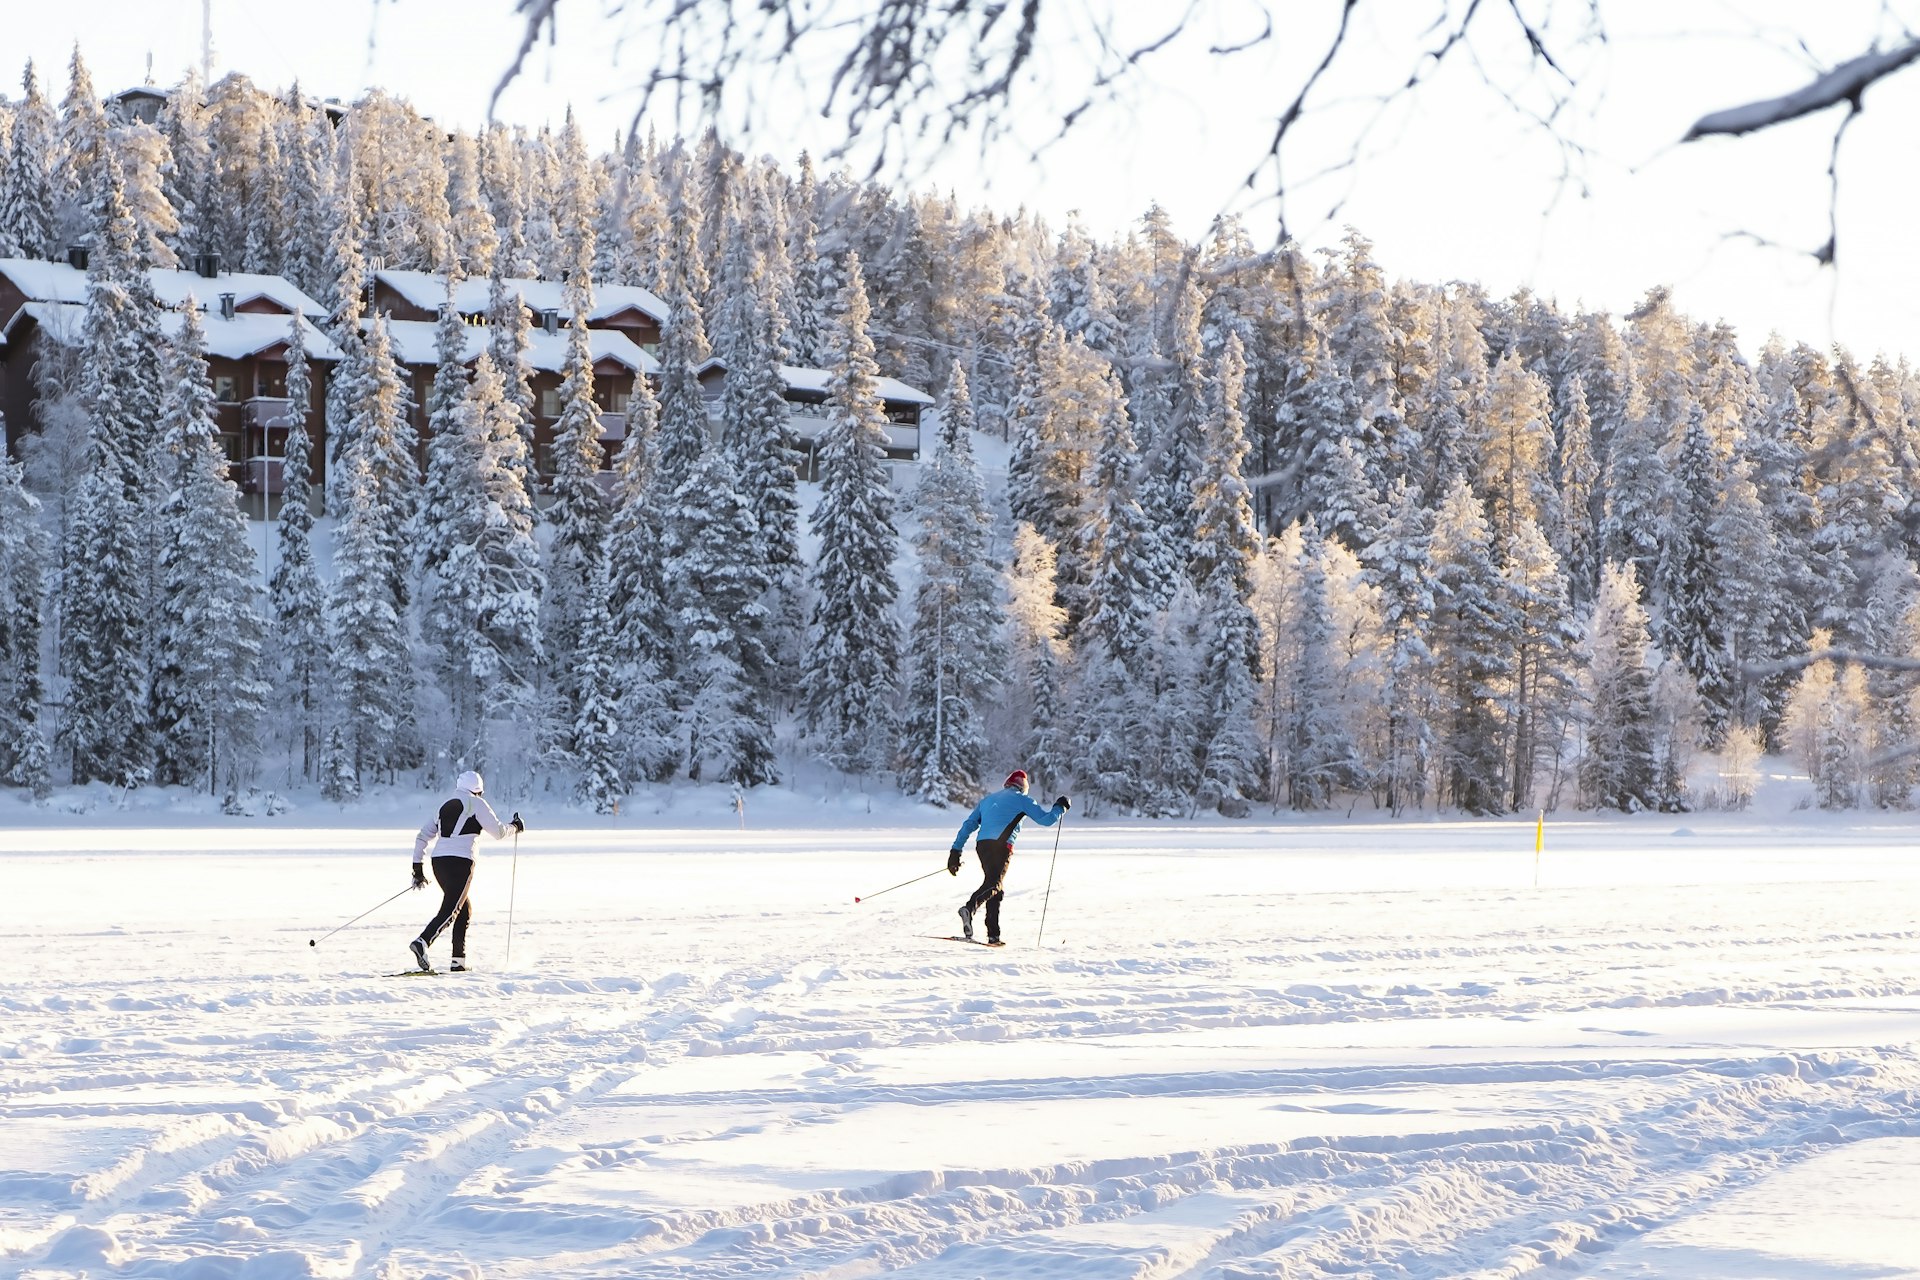 Two athletes running on skis on a frozen lake against the snow-covered forest